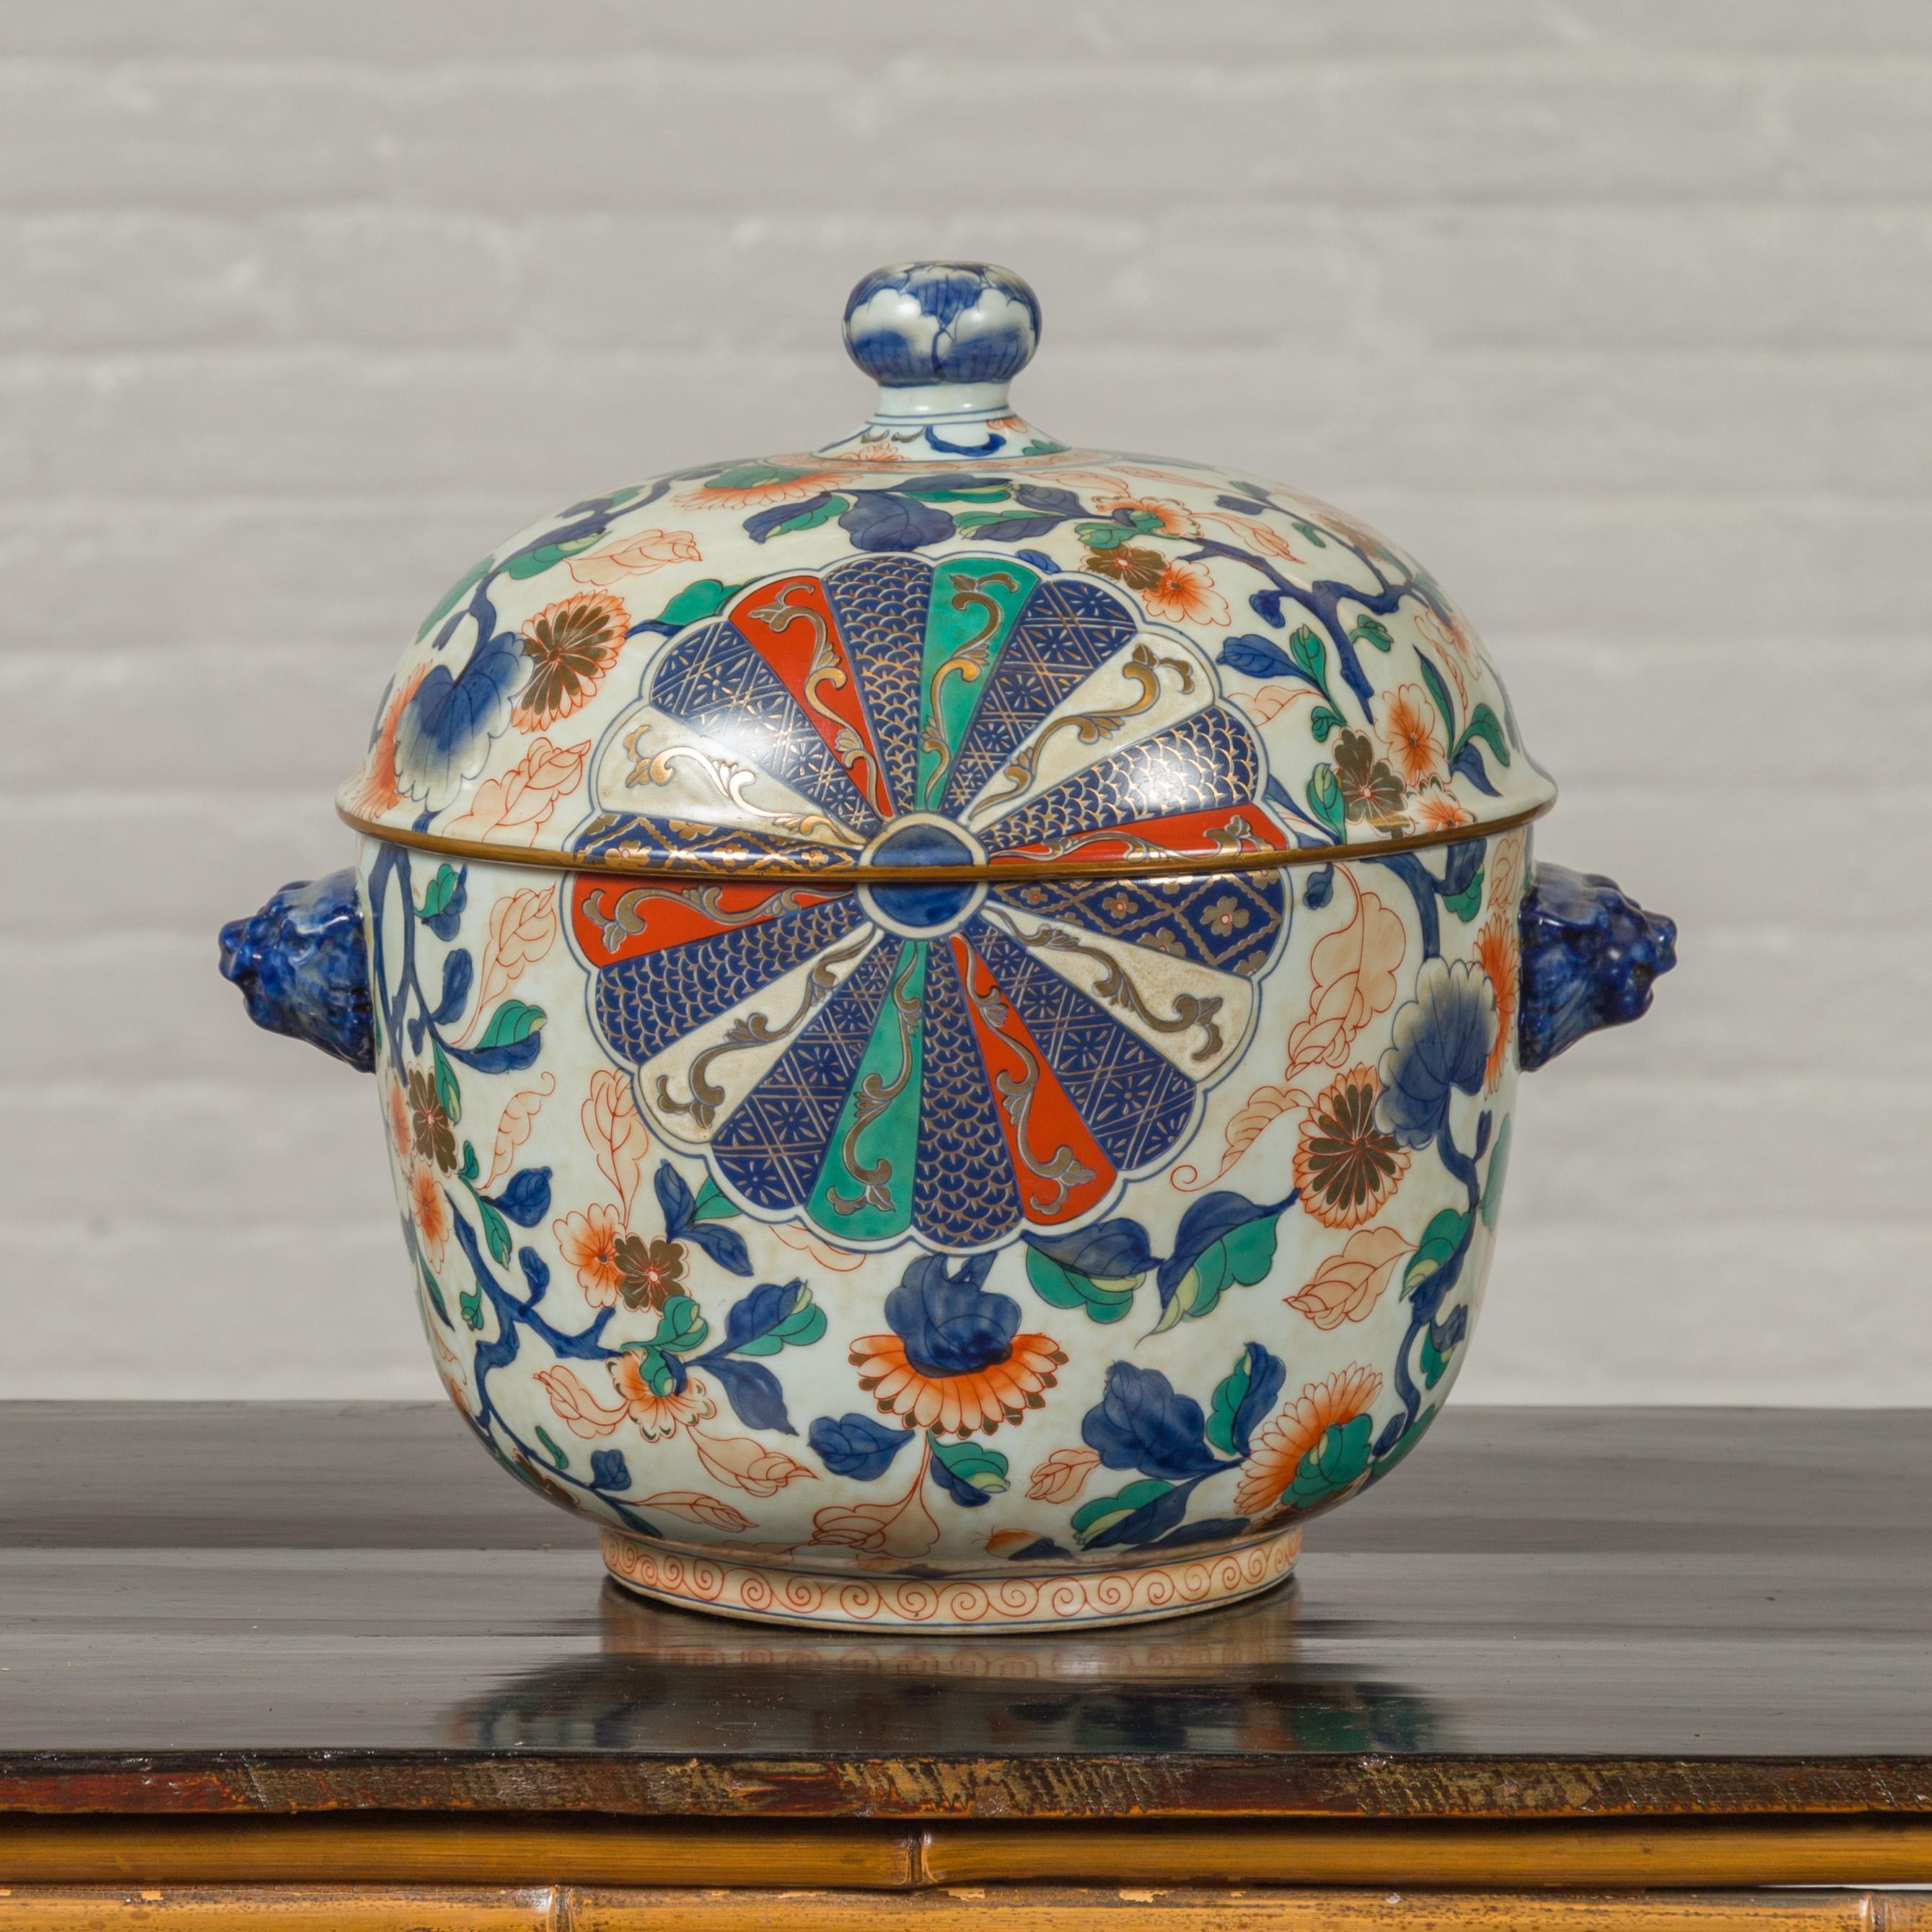 A vintage decorative covered soup tureen from the mid-20th century, with hand painted polychrome decor. Created in Taiwan and hand painted in Hong Kong, this soup tureen captures our attention with its radiating patterns and colorful décor made of